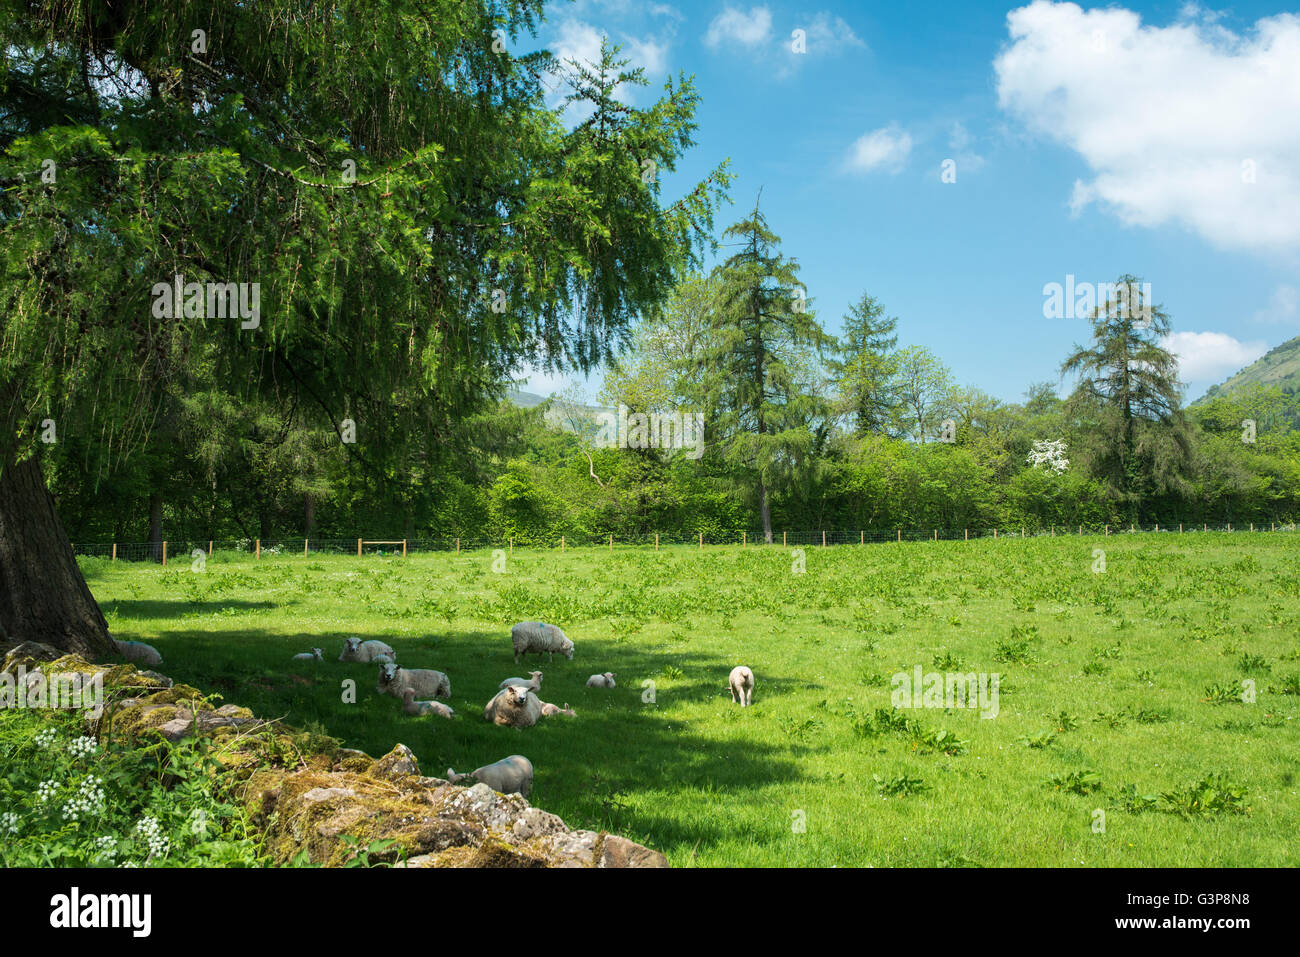 Sheep and lambs in a field sheltering under a tree on a hot summer day. Stock Photo